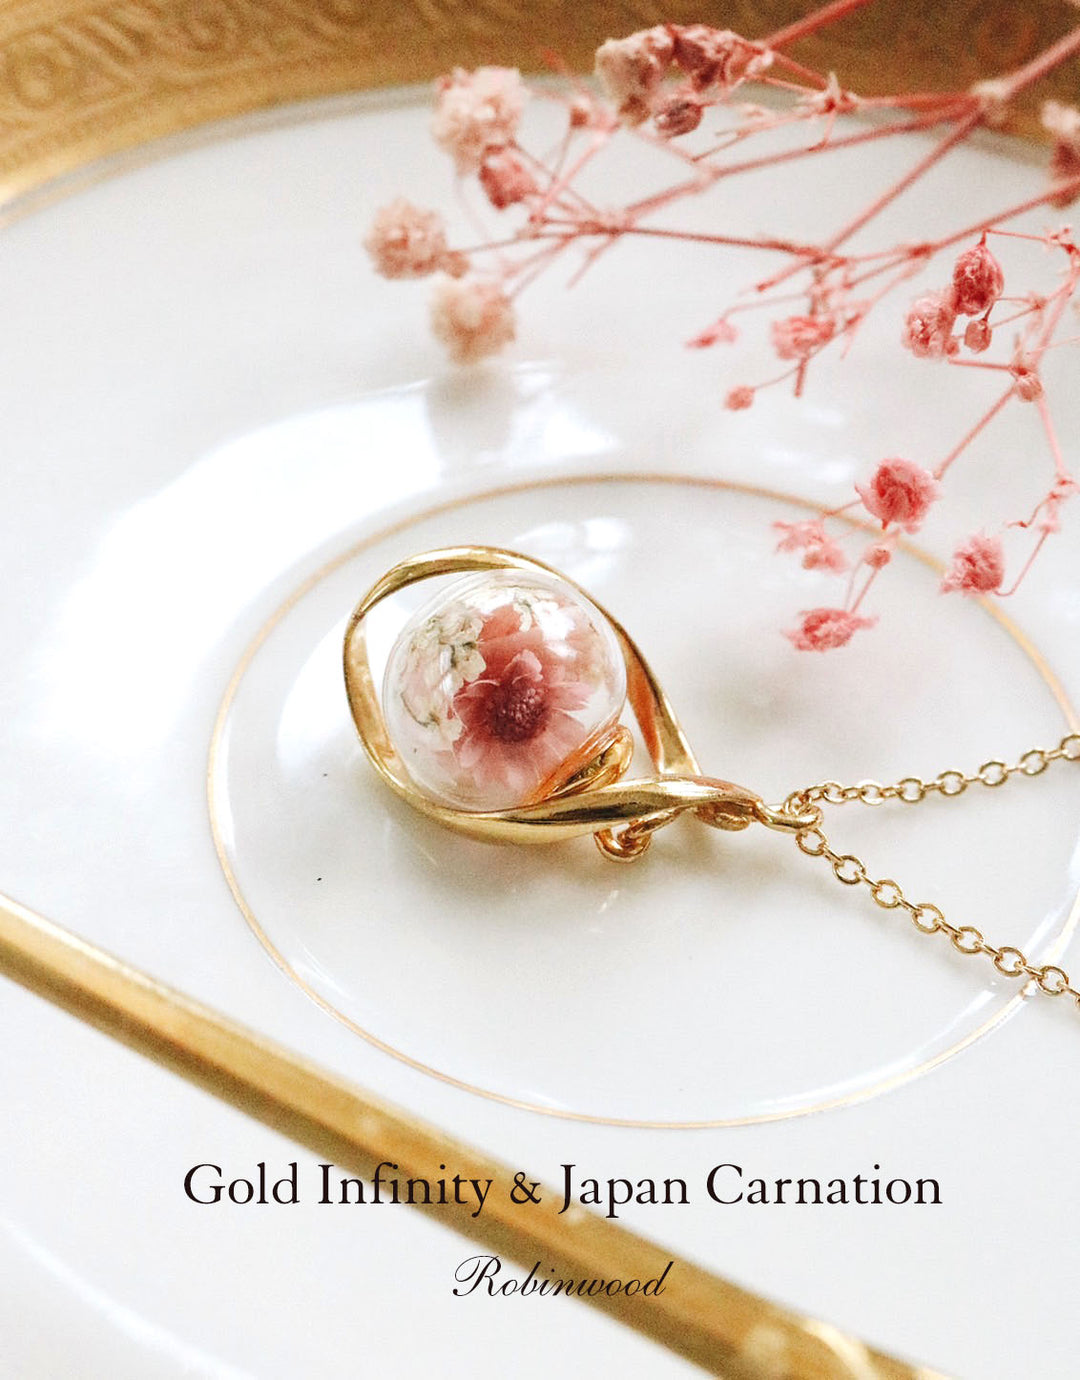 July Collection's " Japan Carnation Gold Infinity, Necklace Series, Robinwood